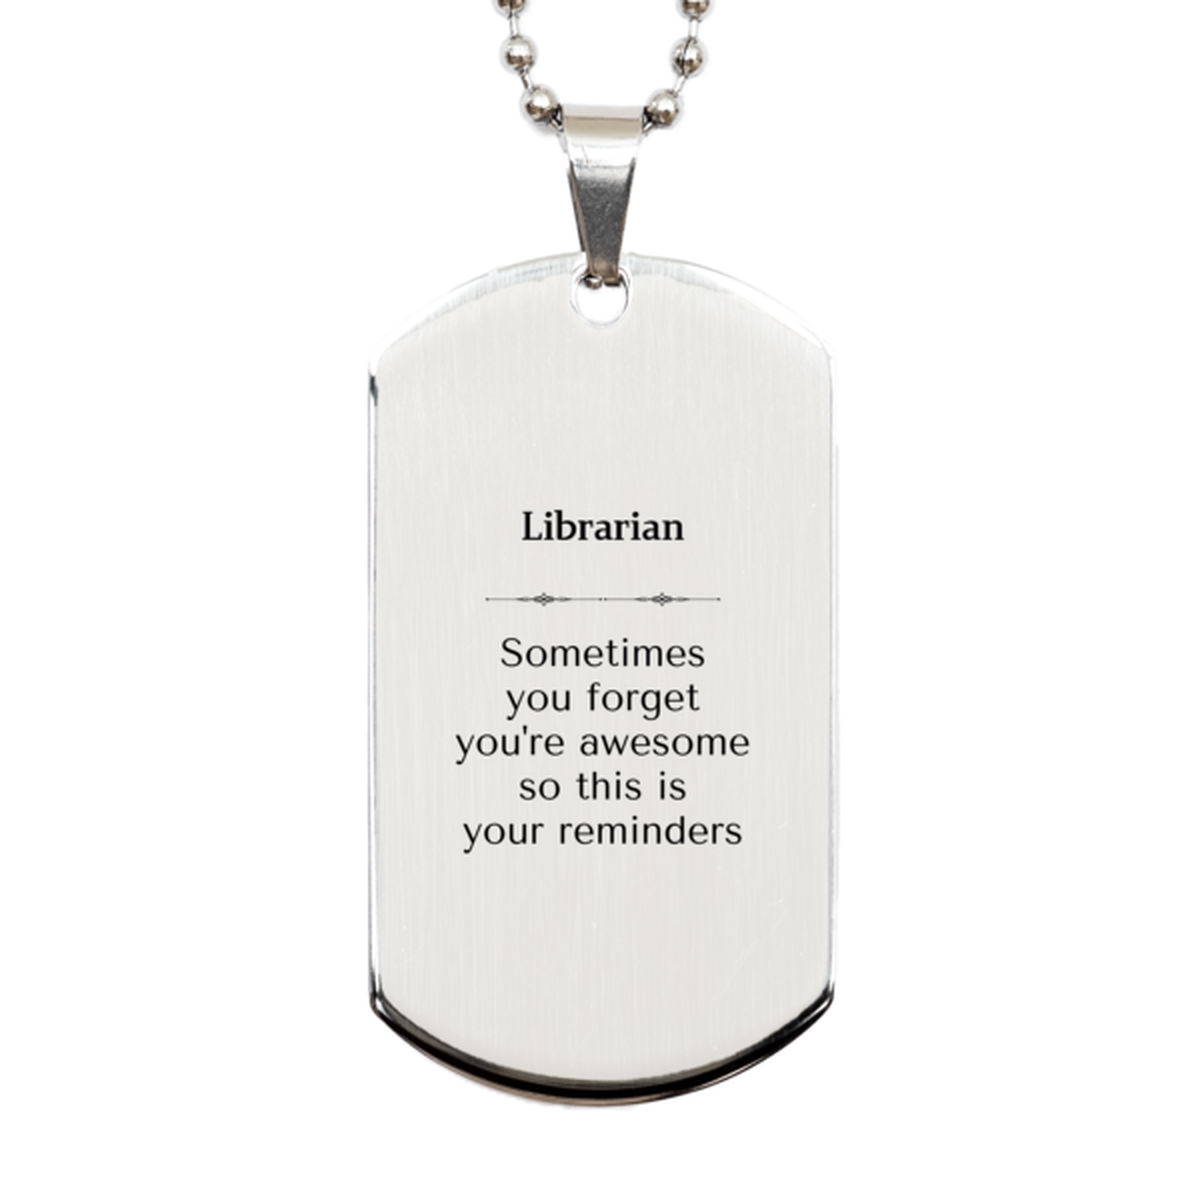 Sentimental Librarian Silver Dog Tag, Librarian Sometimes you forget you're awesome so this is your reminders, Graduation Christmas Birthday Gifts for Librarian, Men, Women, Coworkers